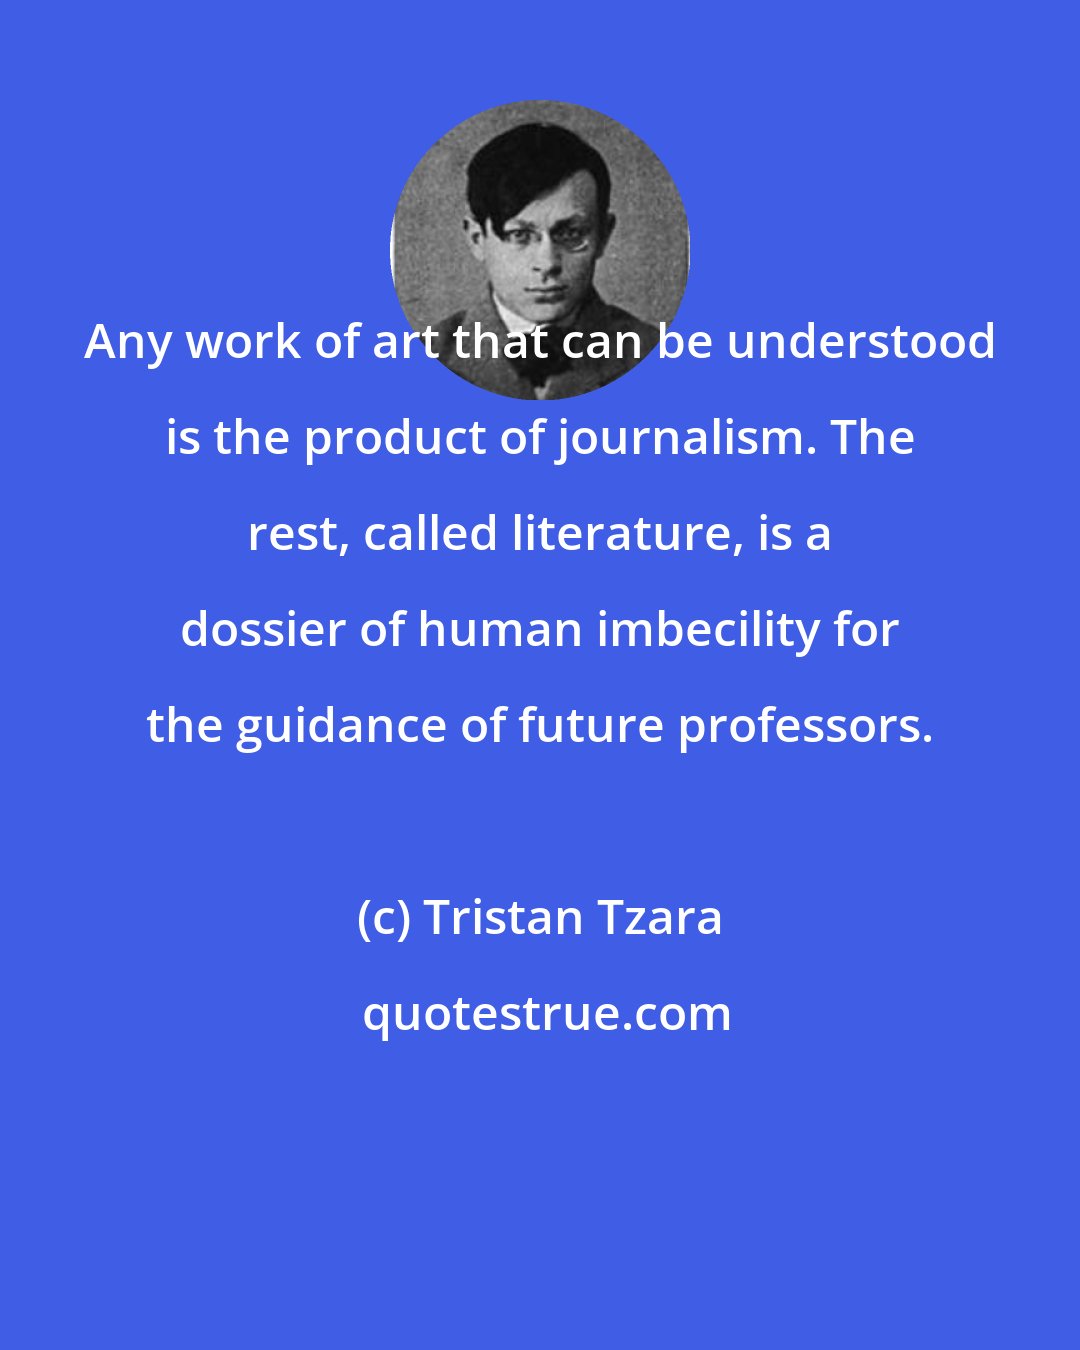 Tristan Tzara: Any work of art that can be understood is the product of journalism. The rest, called literature, is a dossier of human imbecility for the guidance of future professors.